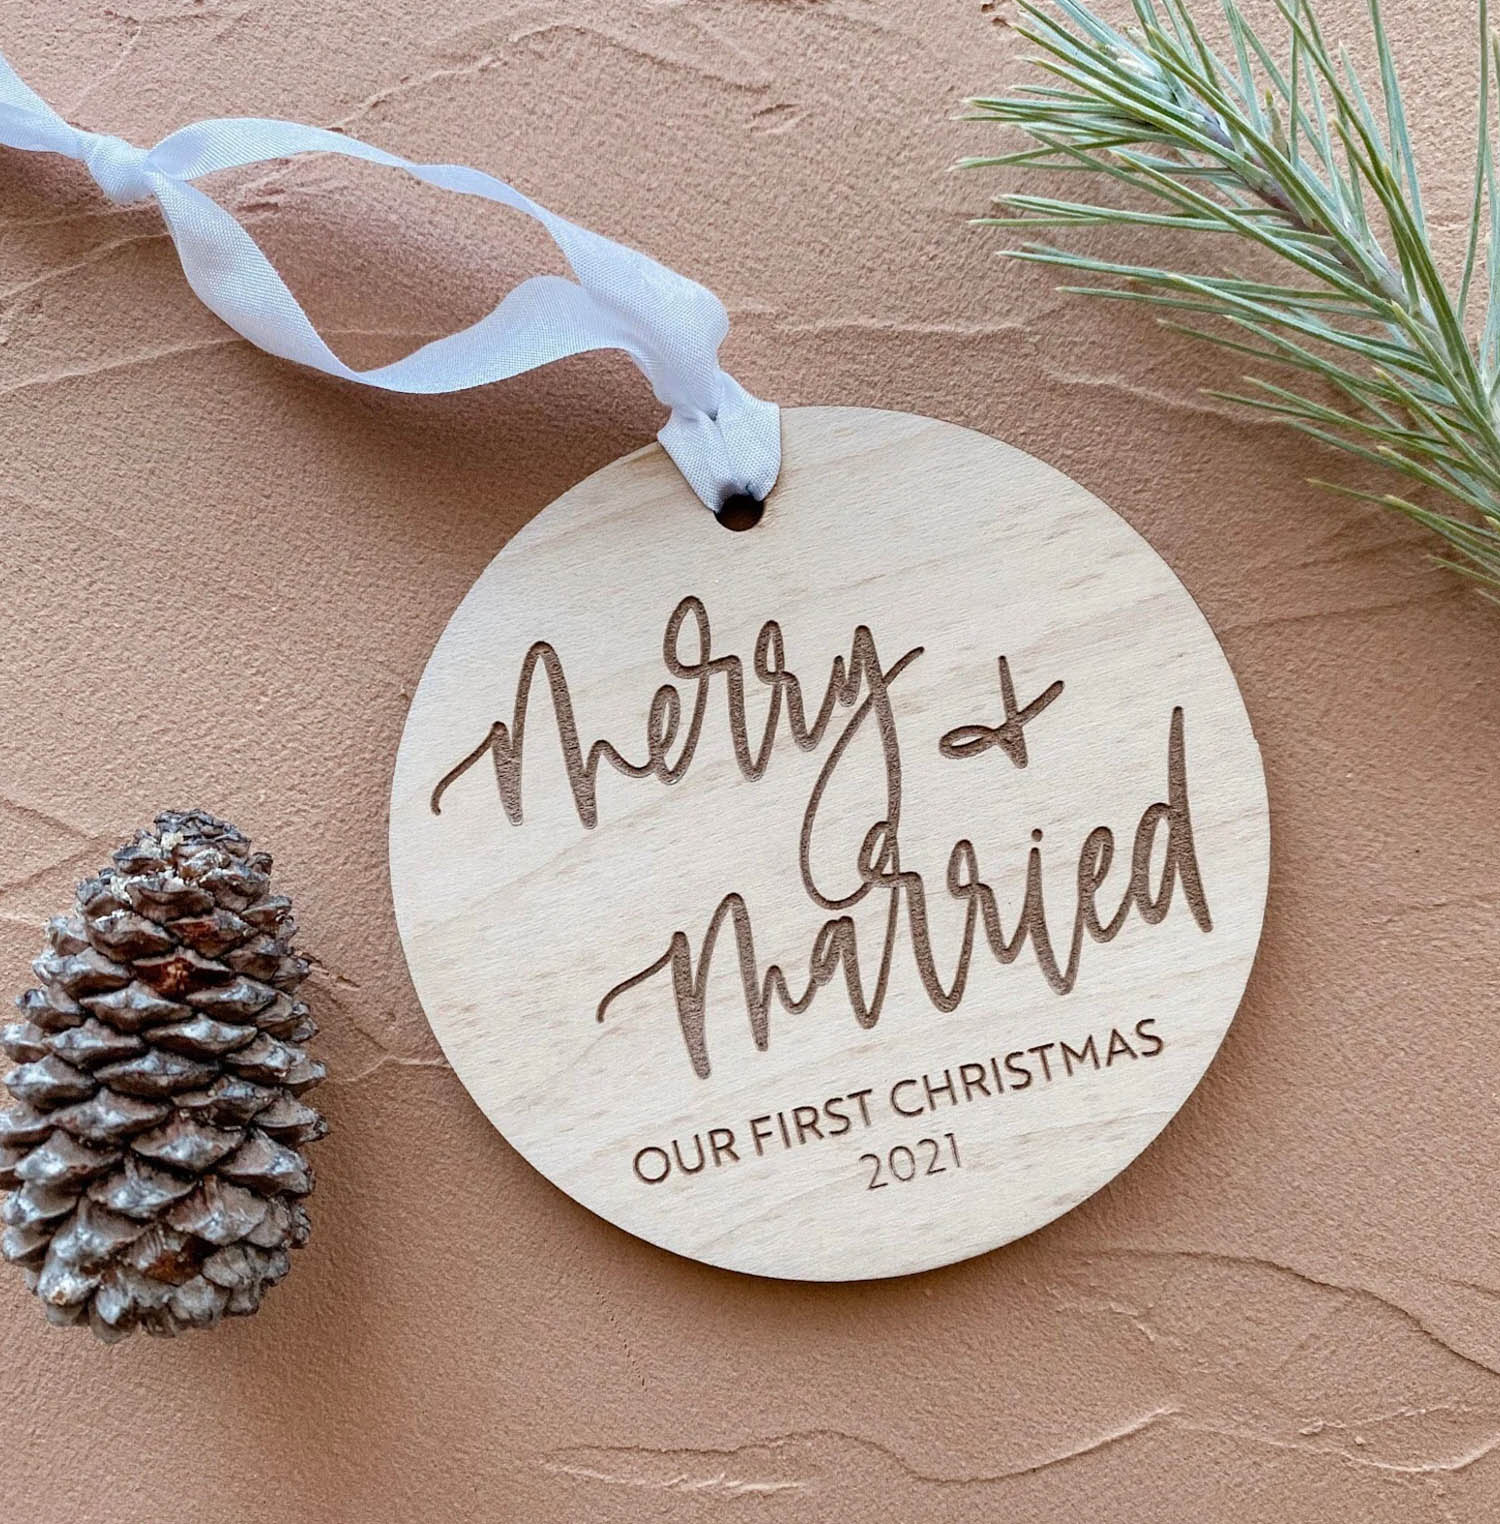 2.85 Ceramic Ornament Christmas Wedding Decoration Gift for Couple Newlywed Married Engaged 18 NURIONSS Our First Christmas Engaged Ornaments 2021